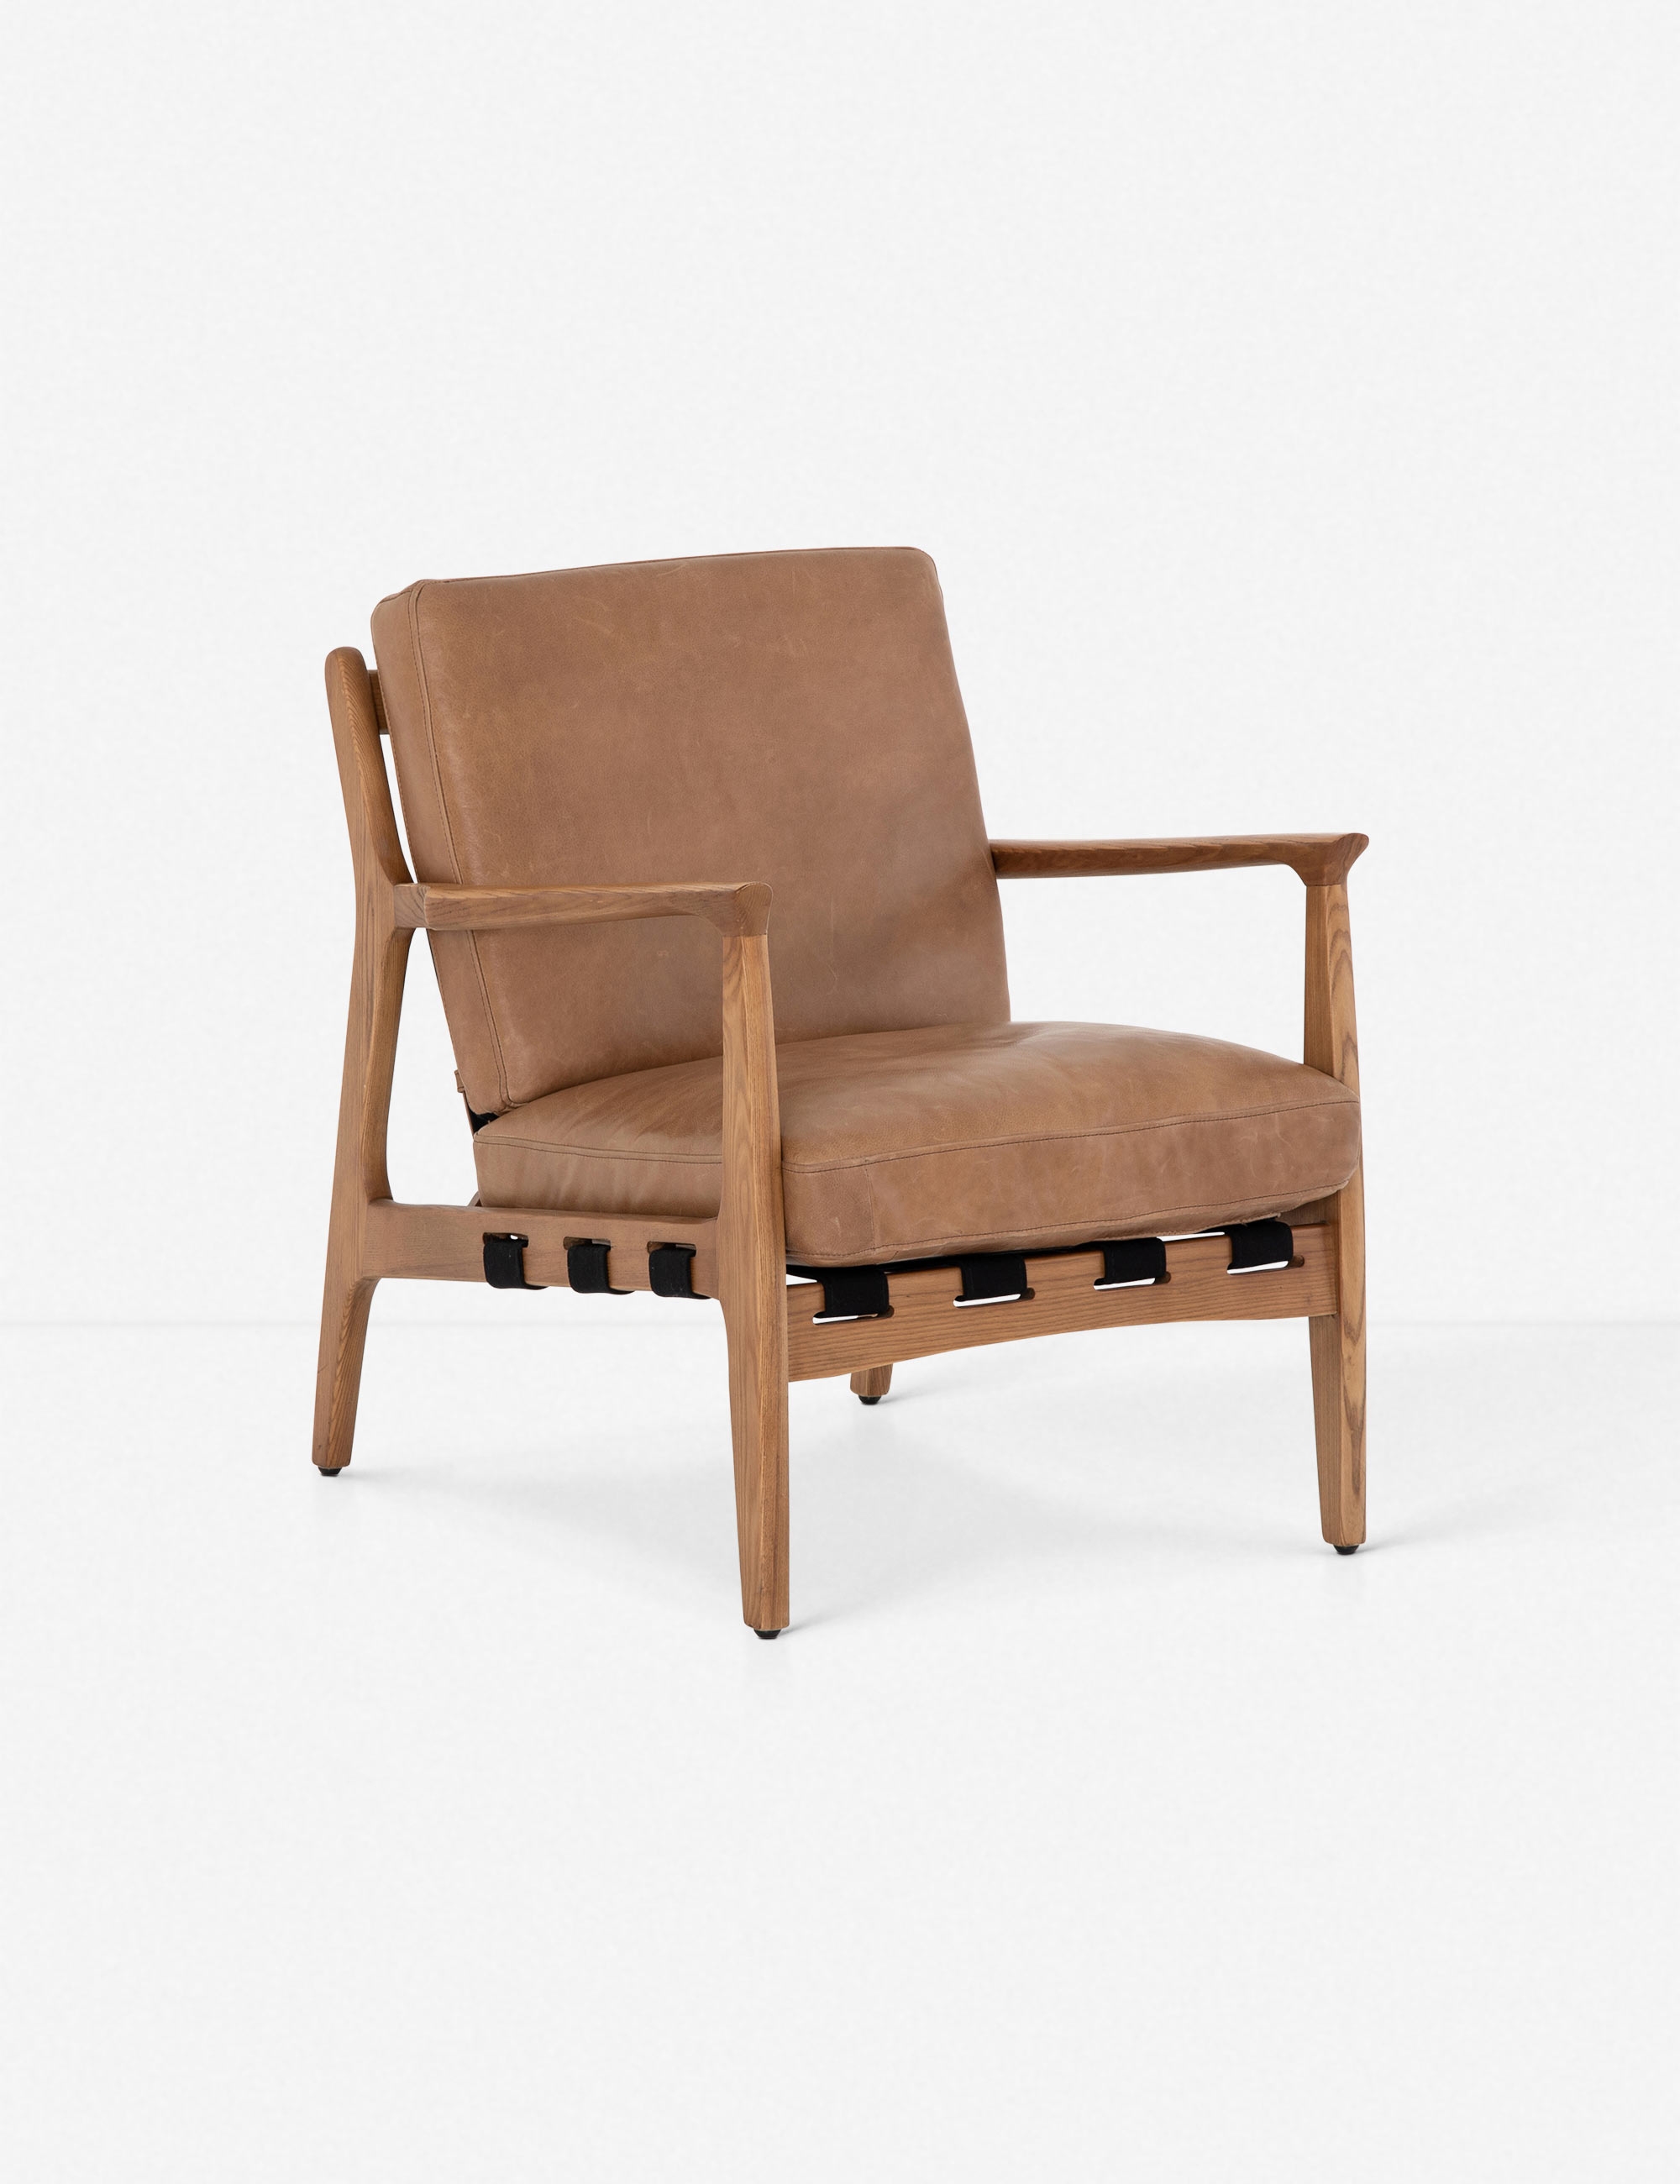 Kenneth Leather Chair - Image 0